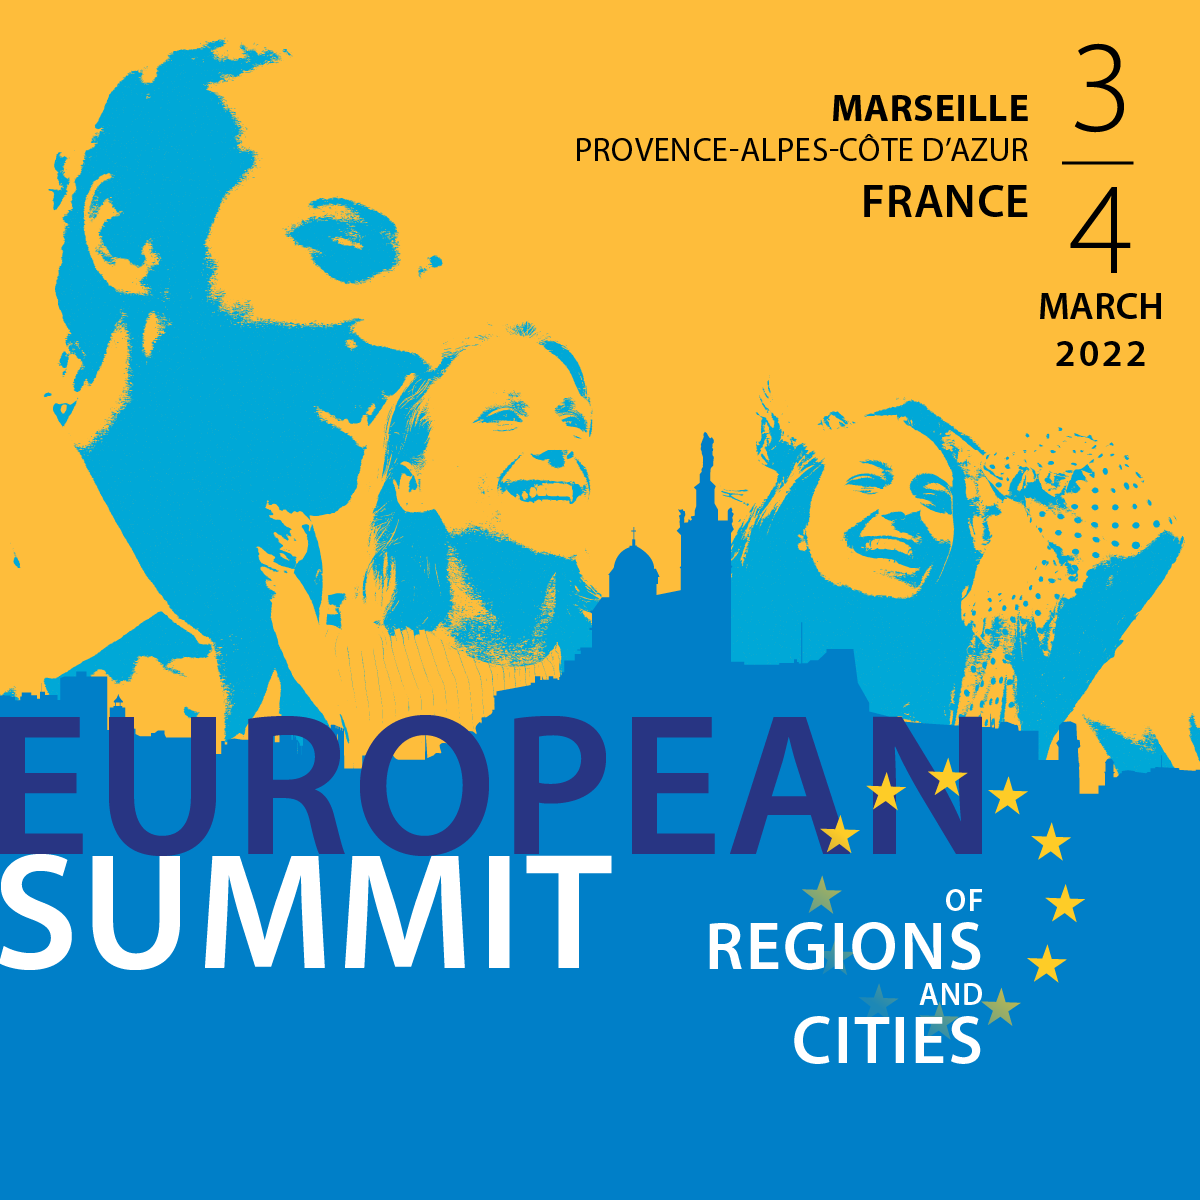 European Summit of Regions and Cities